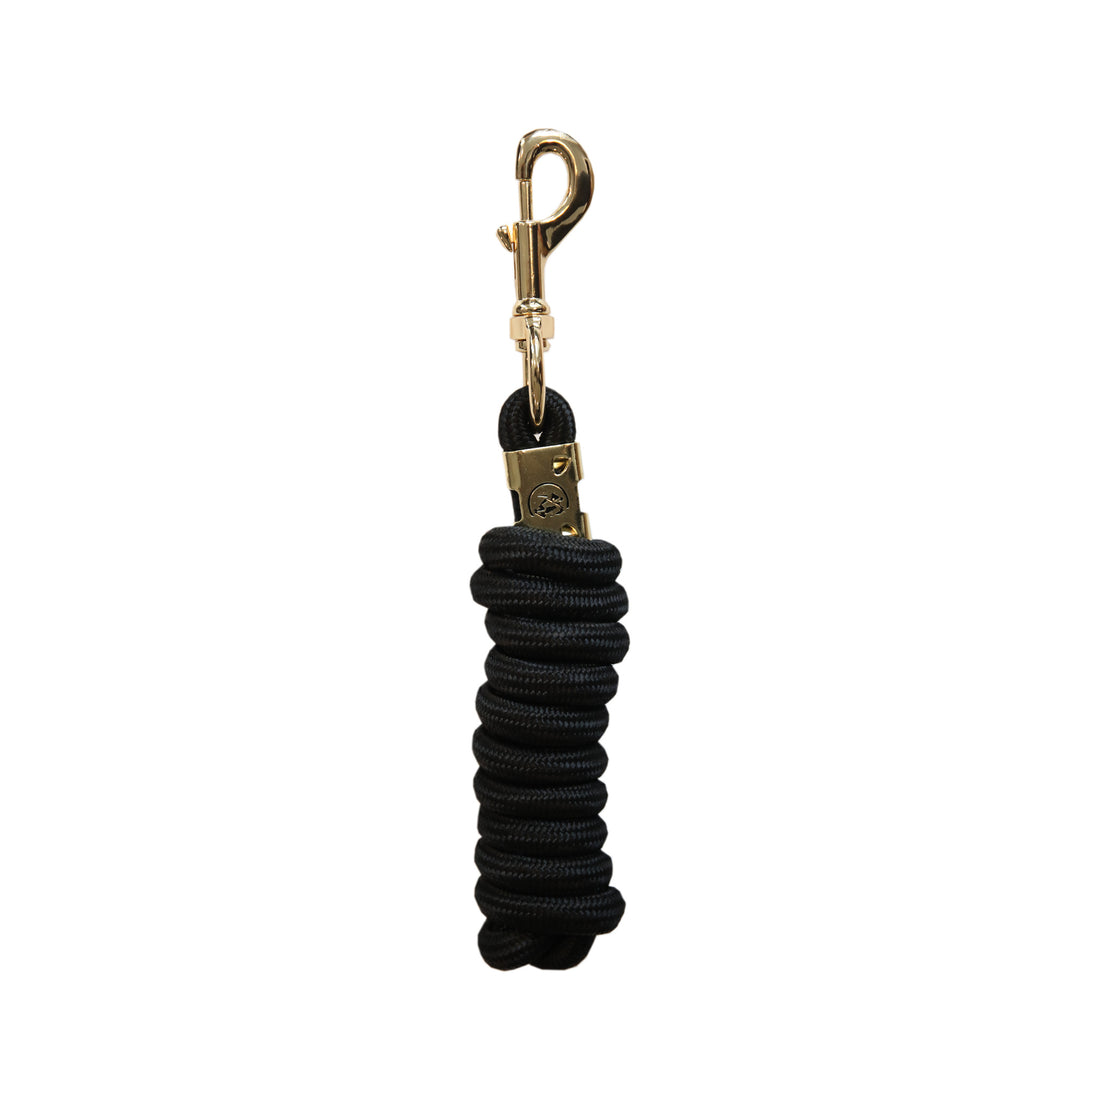 The classic Kentucky lead rope is strong and durable, yet soft for your hands. Comes with a sturdy gold clip. Available in multiple colours. 